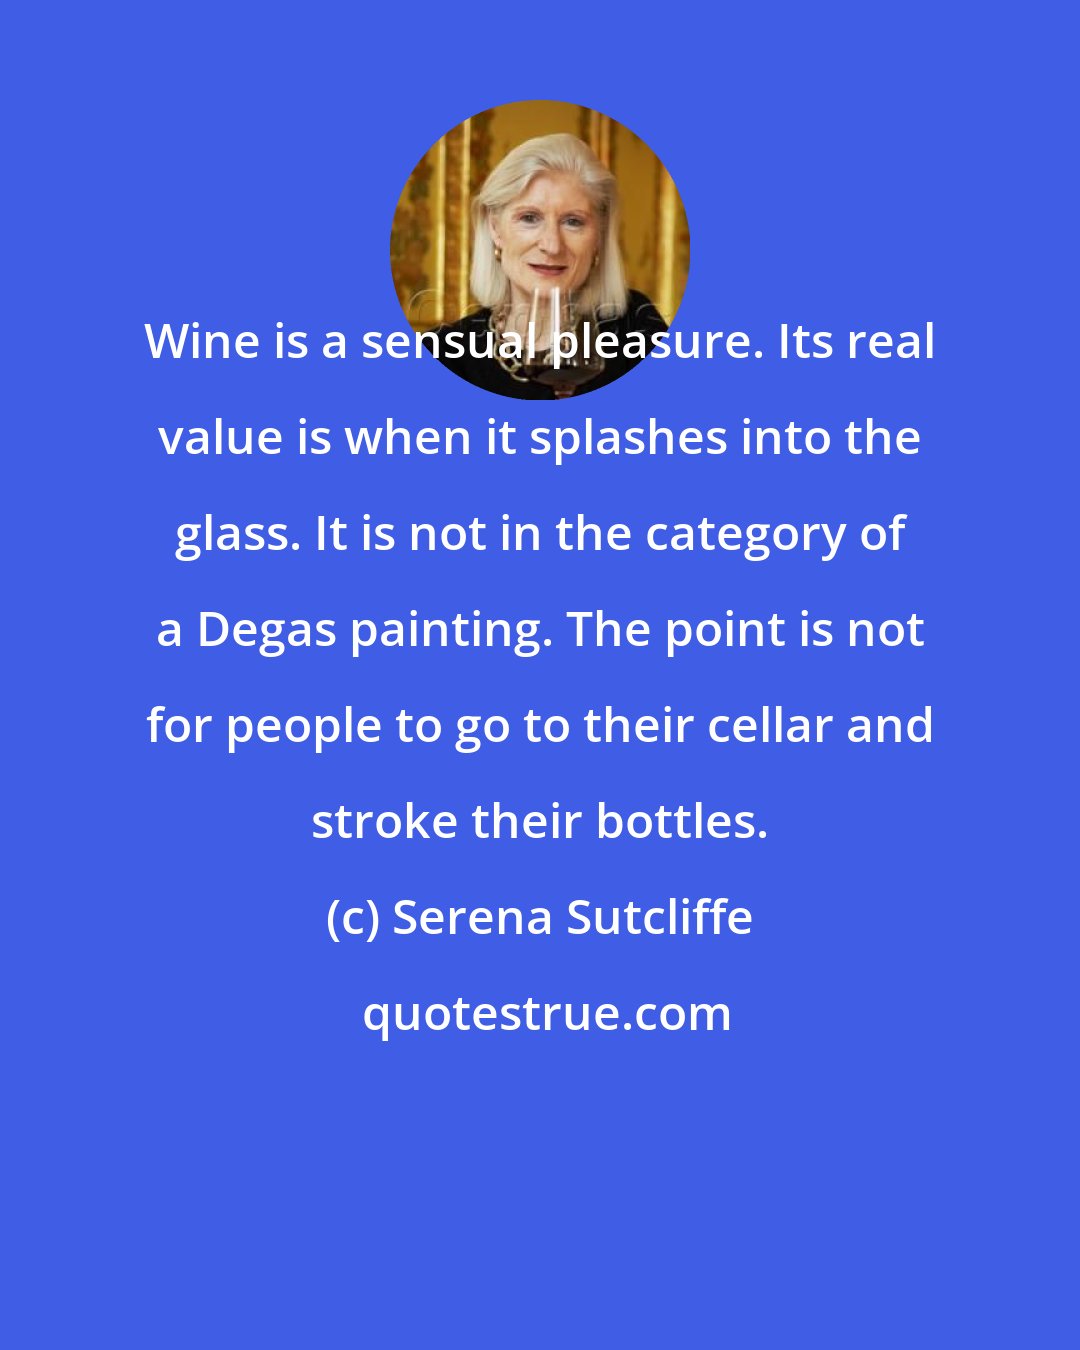 Serena Sutcliffe: Wine is a sensual pleasure. Its real value is when it splashes into the glass. It is not in the category of a Degas painting. The point is not for people to go to their cellar and stroke their bottles.